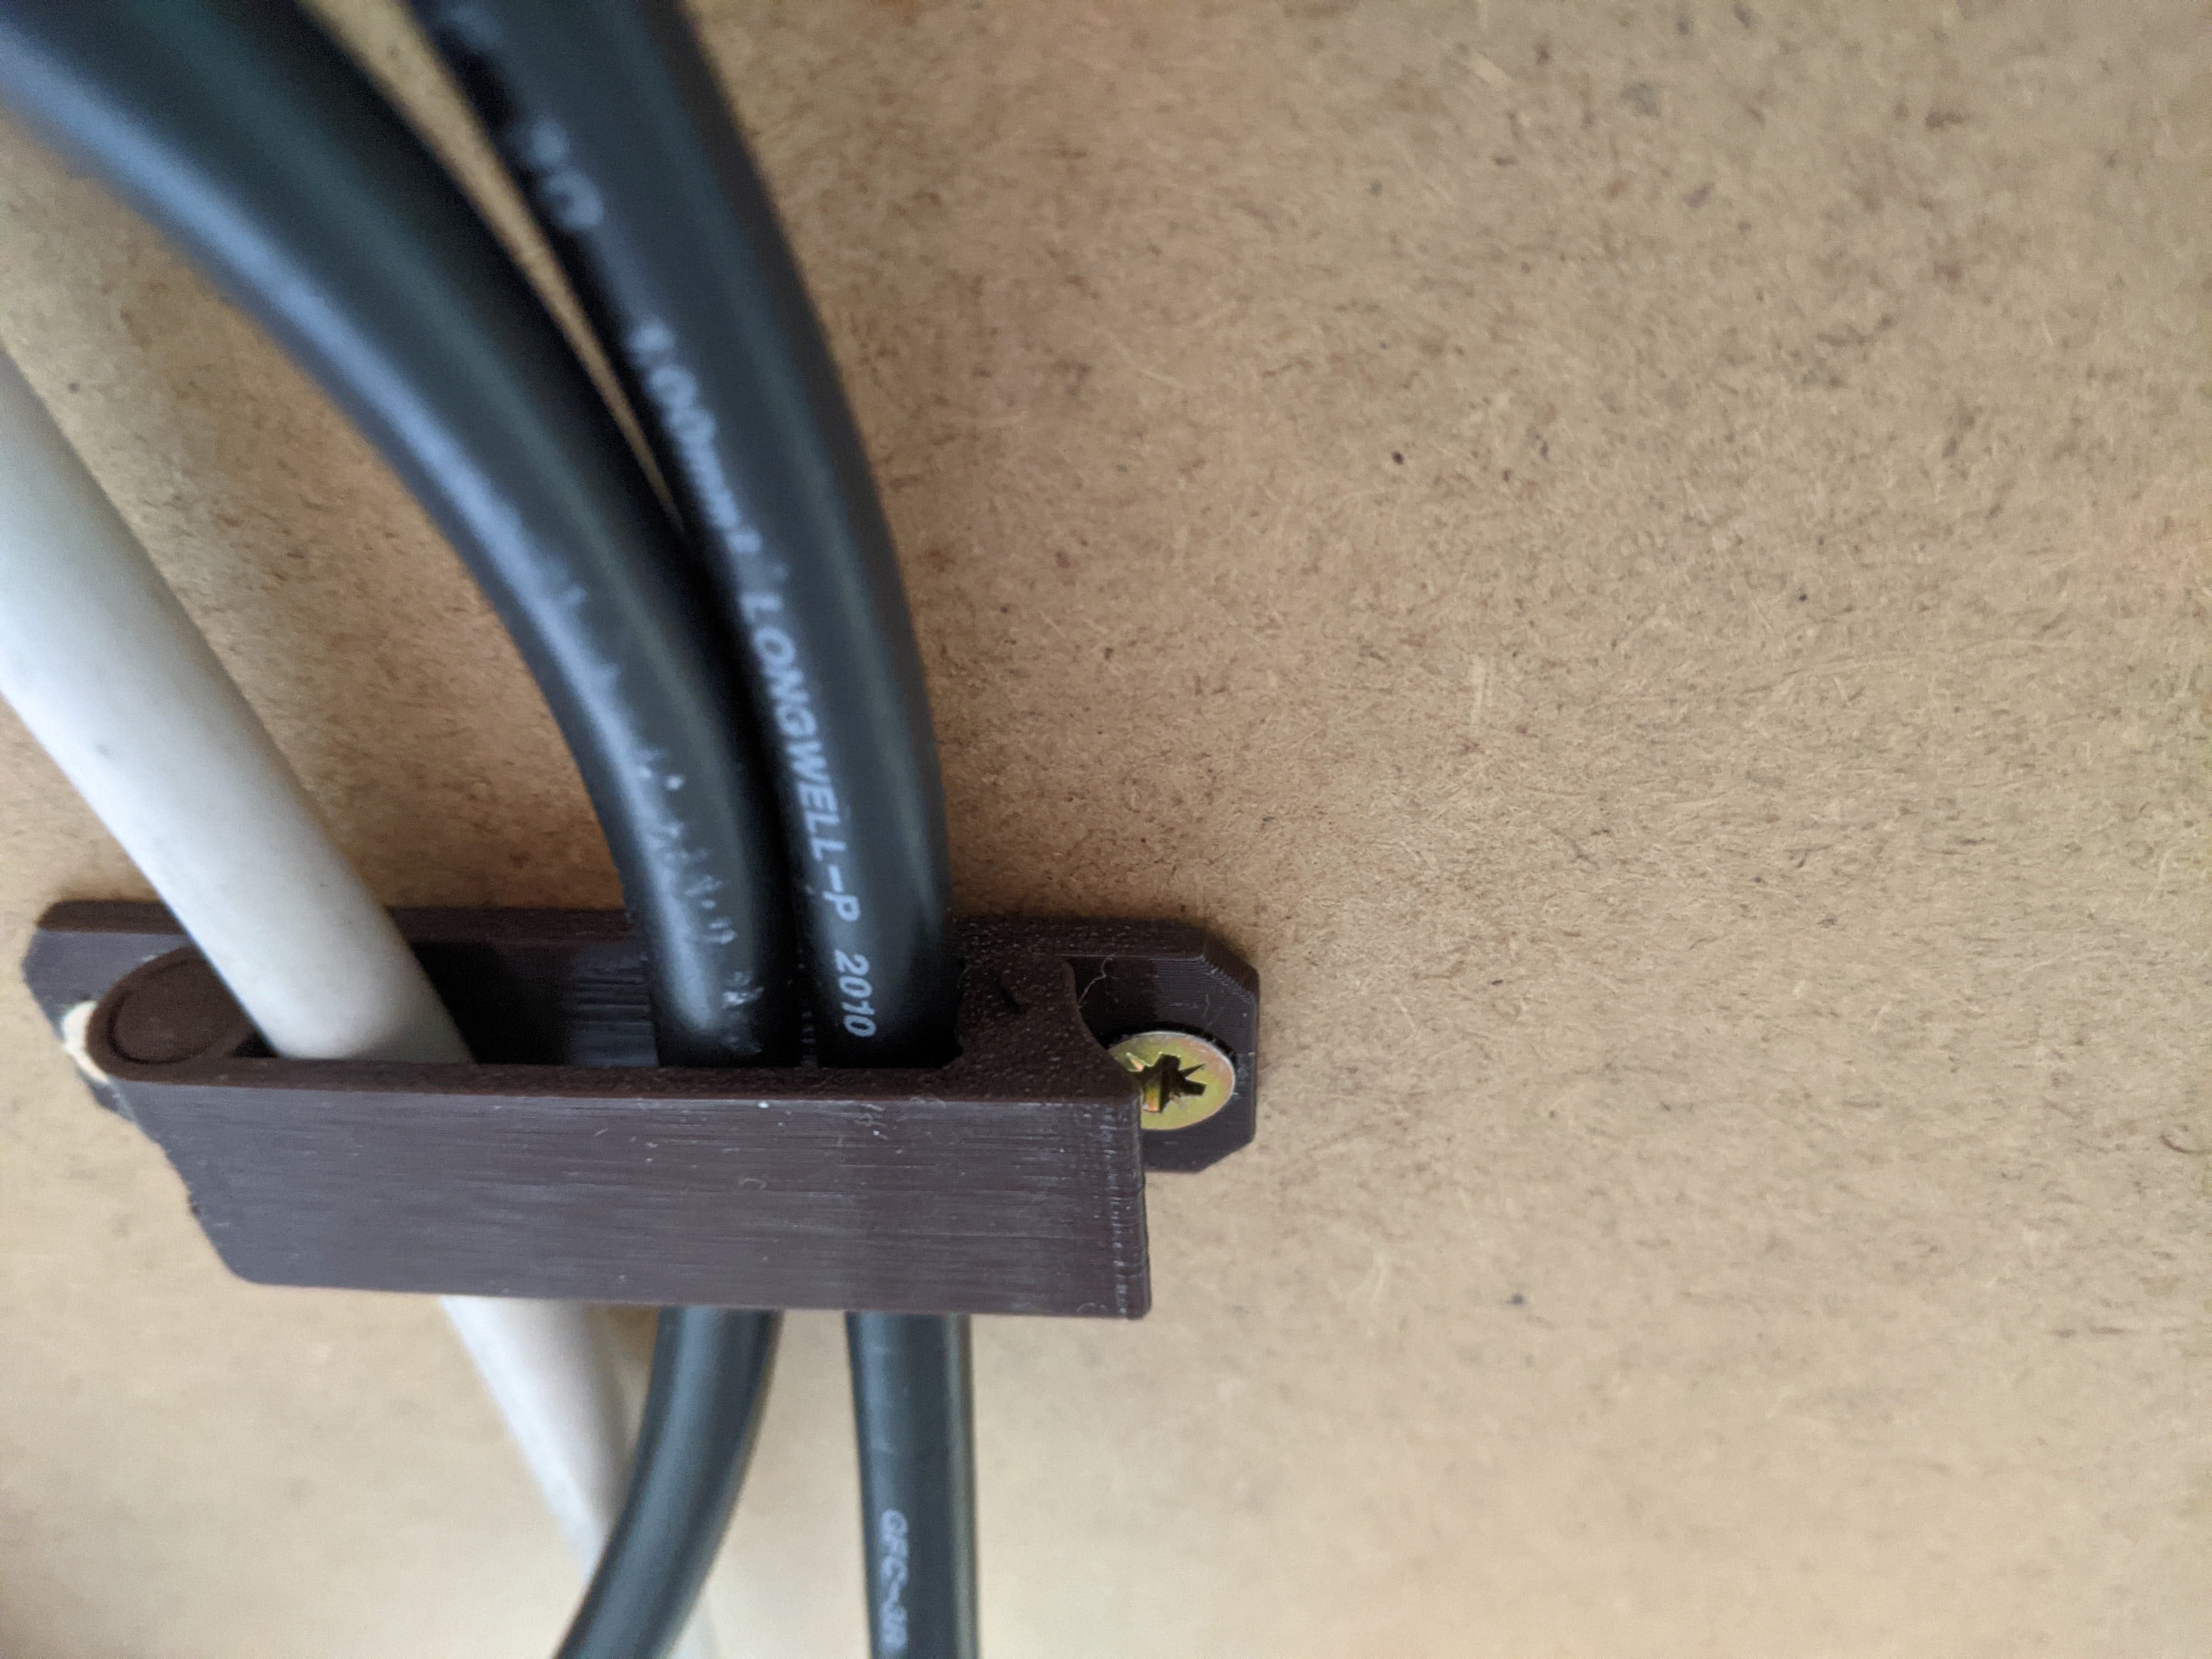 Cable management clip with hinge